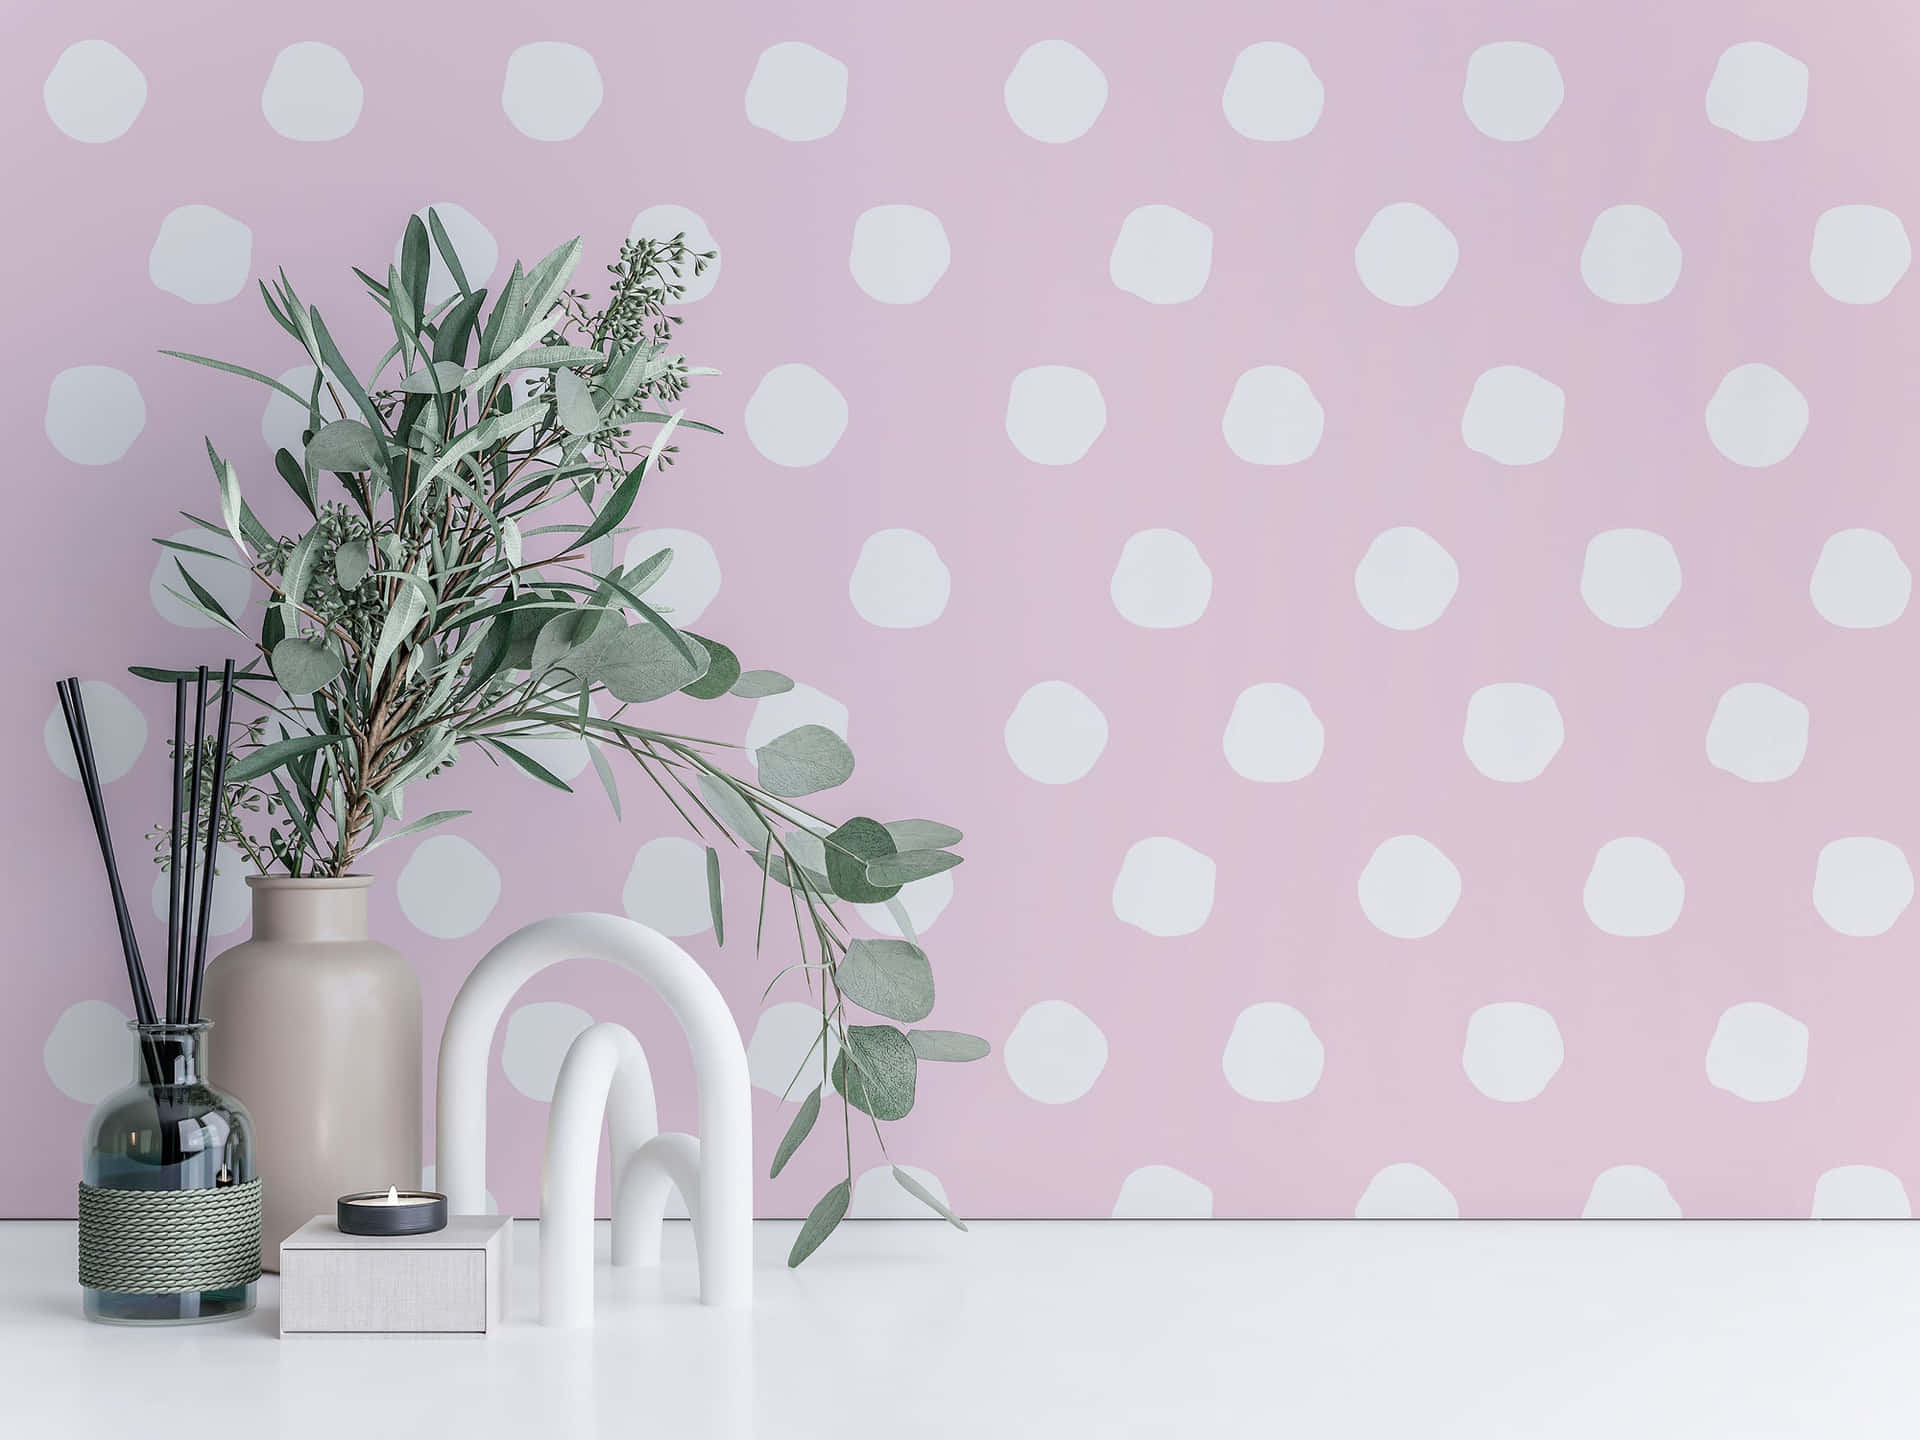 A Pink Wall With White Dots And A Vase Wallpaper